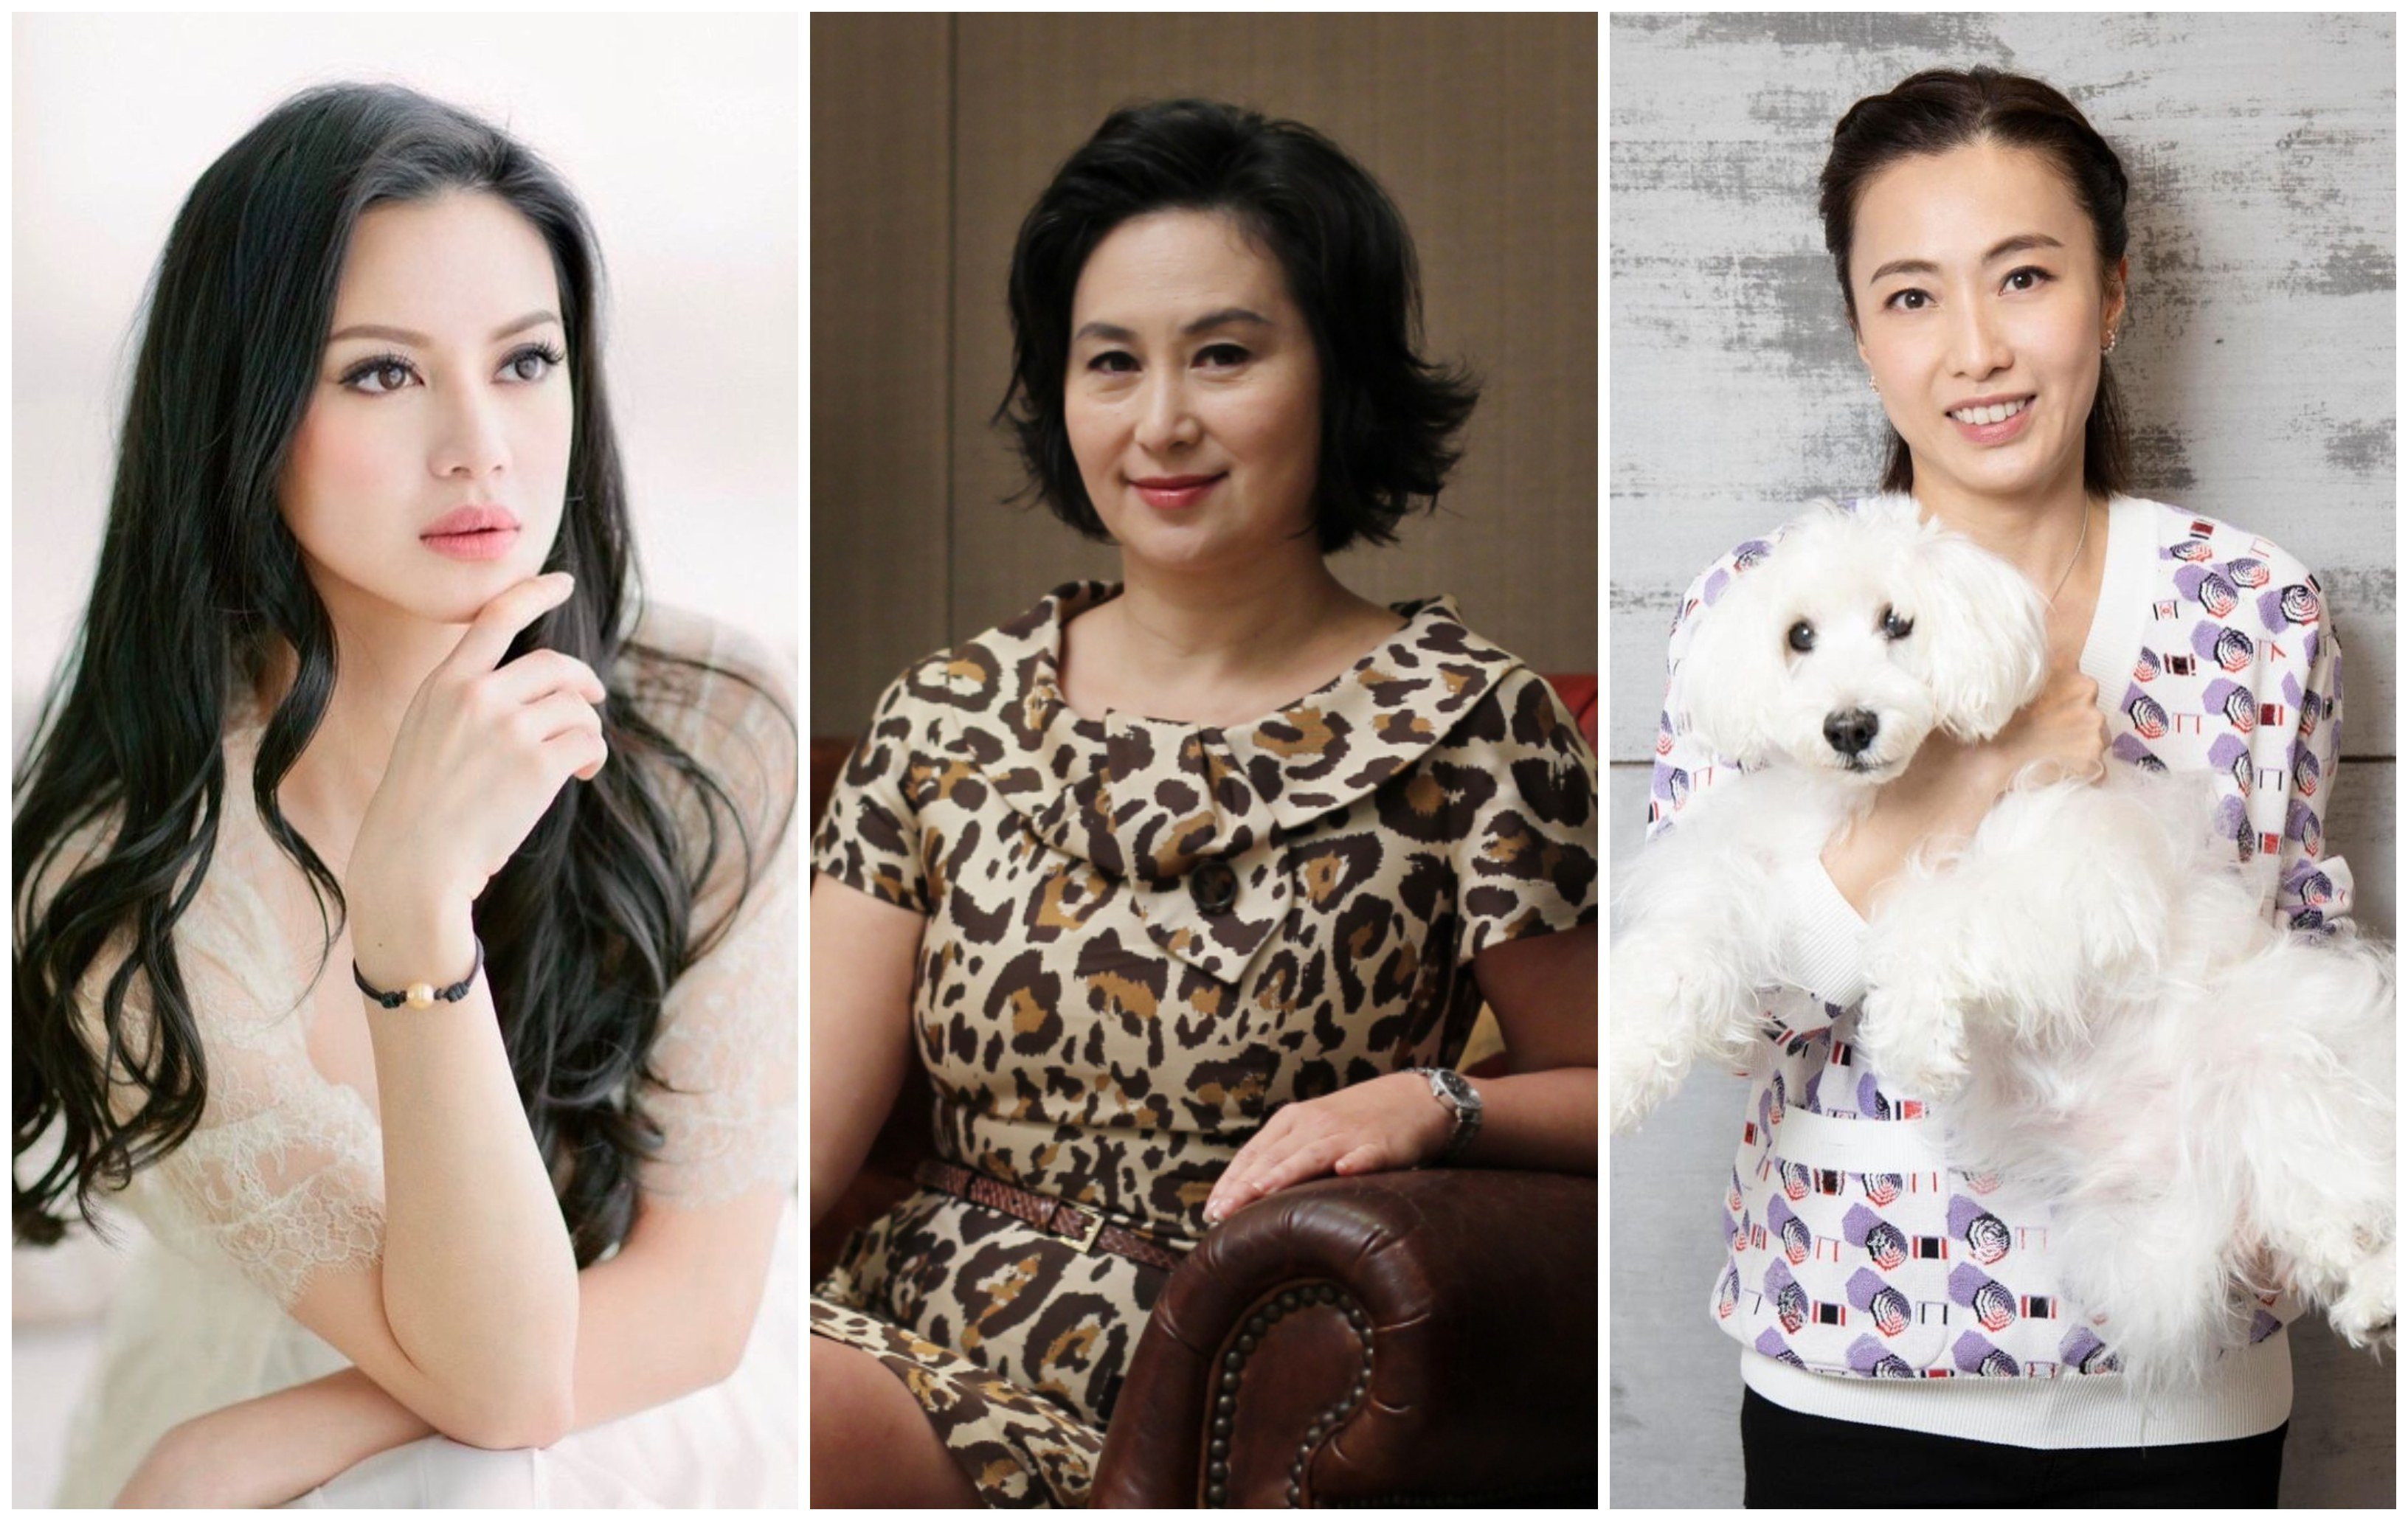 Three Hong Kong women making a difference: Emily Lam-ho, Pansy Ho and Kimbee Chan. Photos: @emilylam.ho/Instagram; SCMP; @kimbeechan_official/Instagram